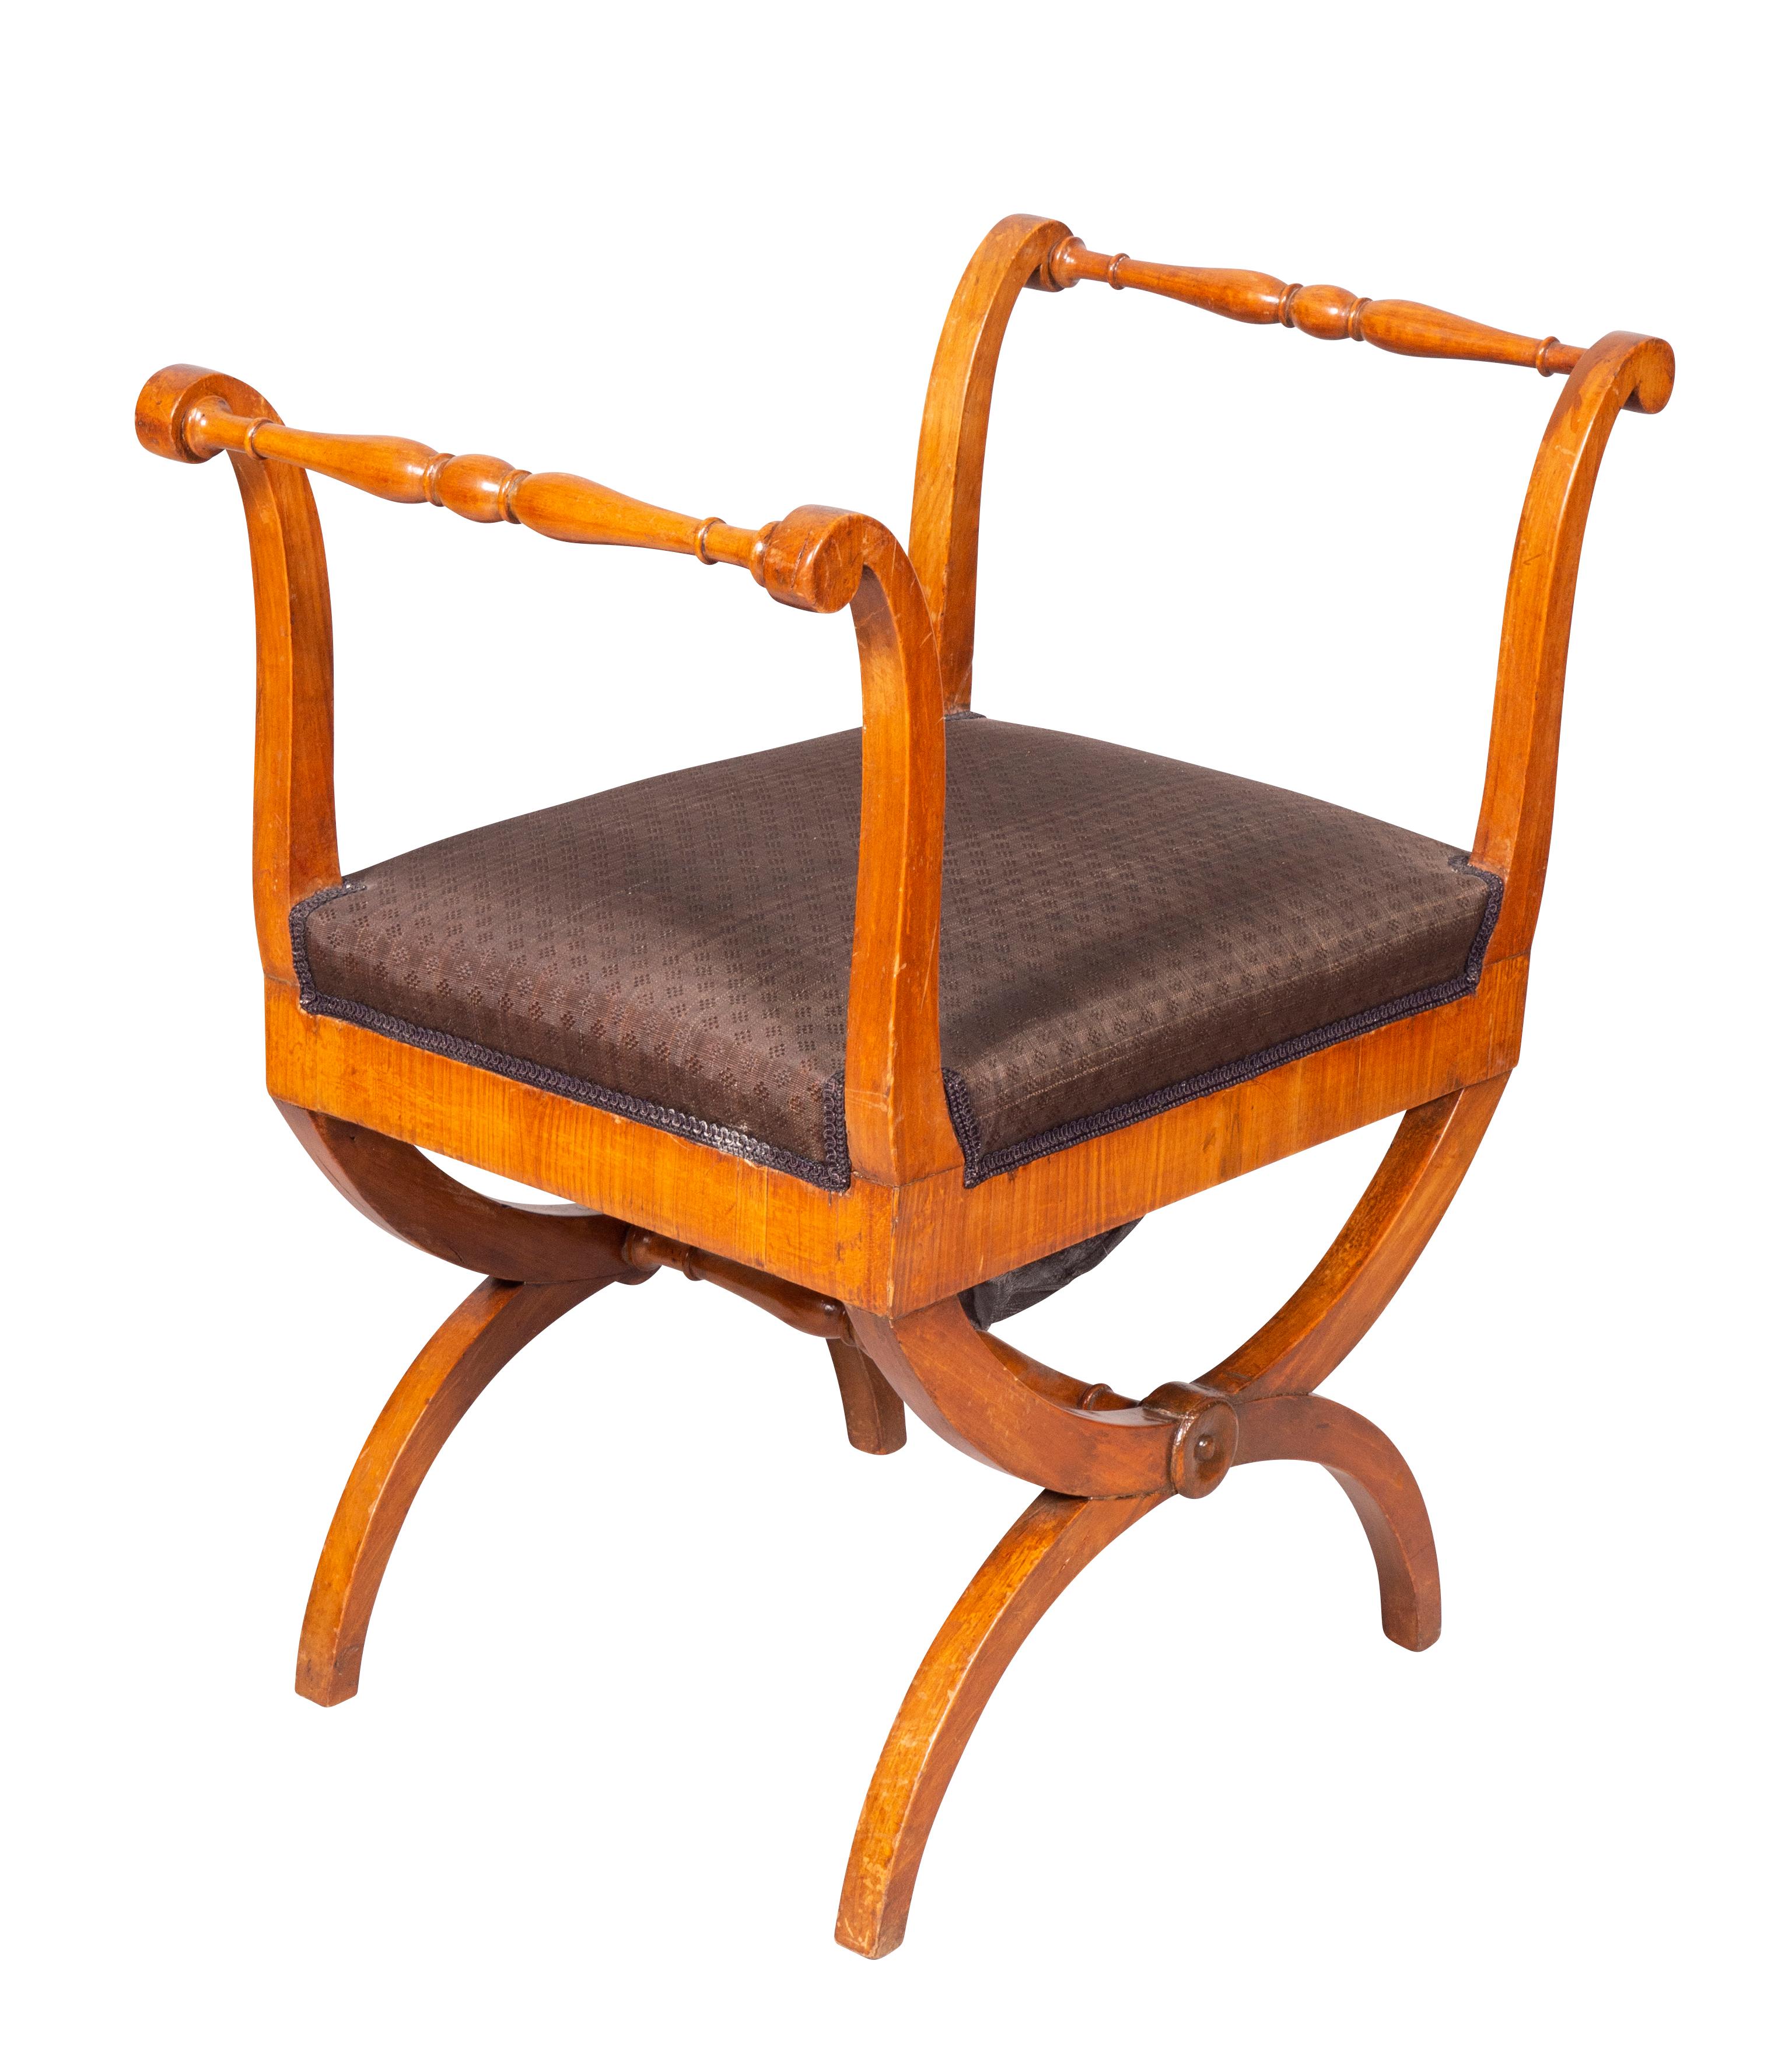 With tall scrolled sides with turned rails, upholstered seat raised on curule form legs.